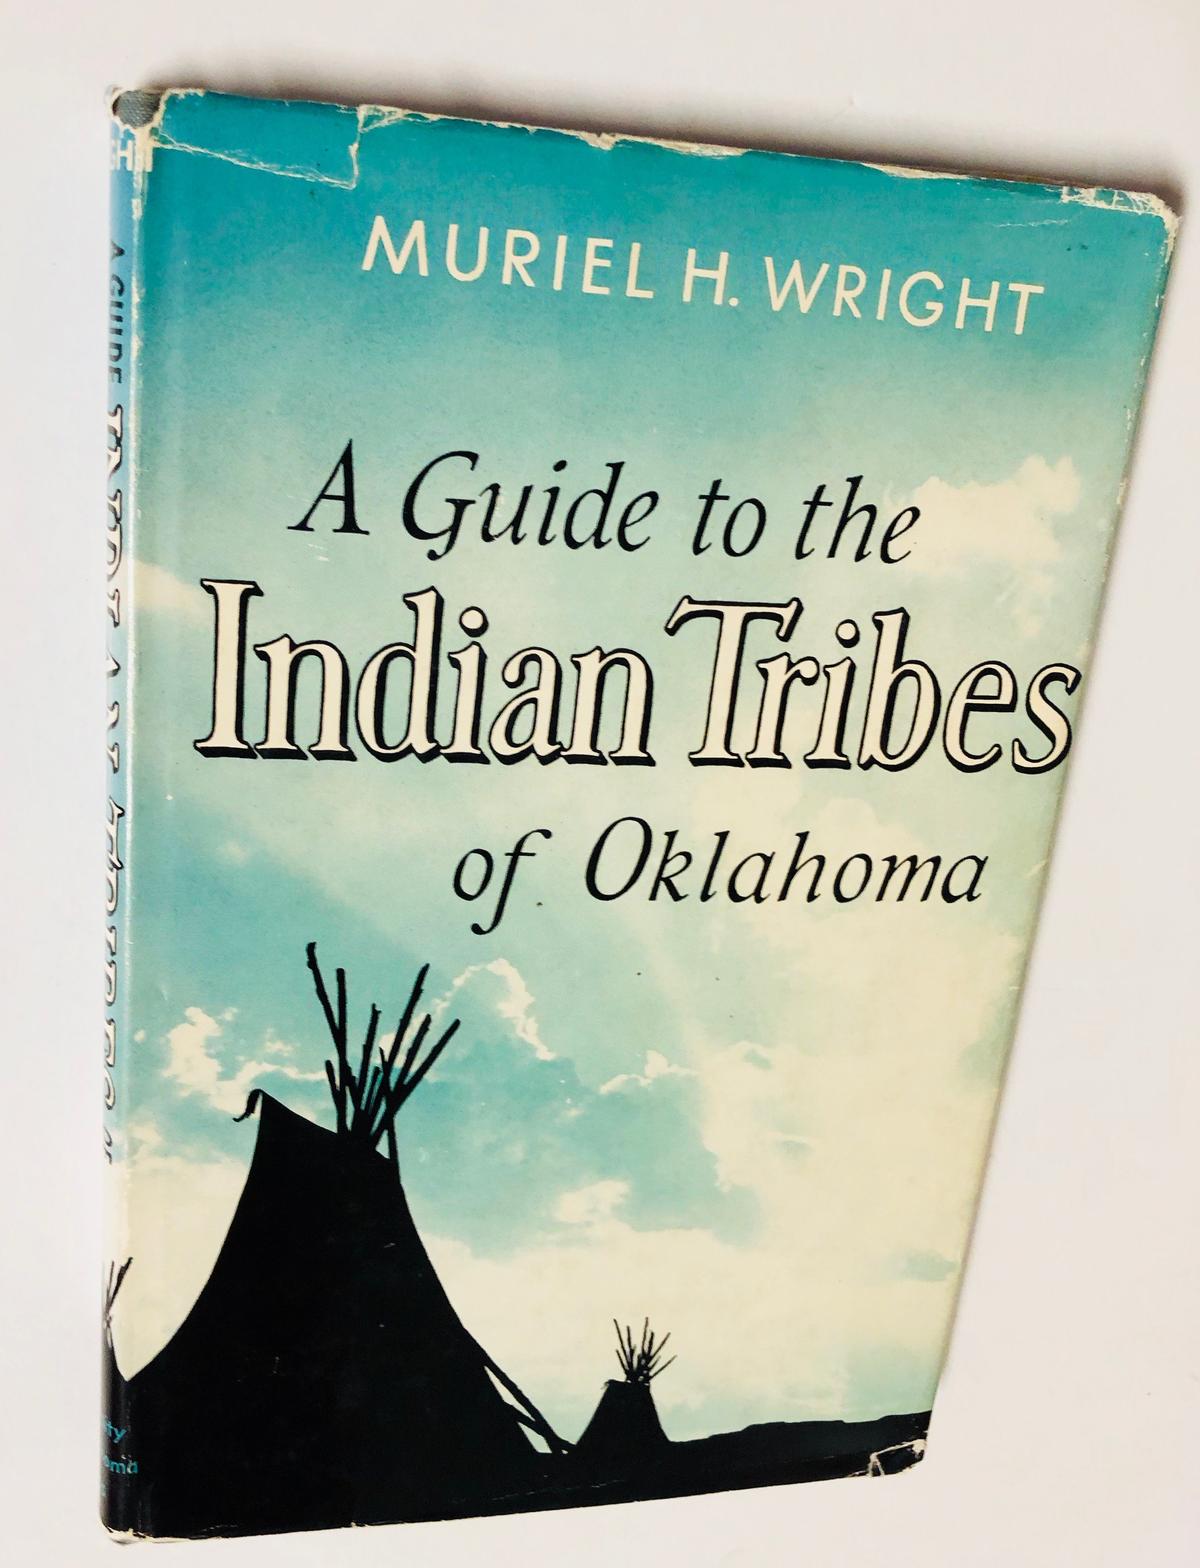 RARE A Guide to the Indian Tribes of Oklahoma by Muriel H. Wright (1951) First Edition SIGNED